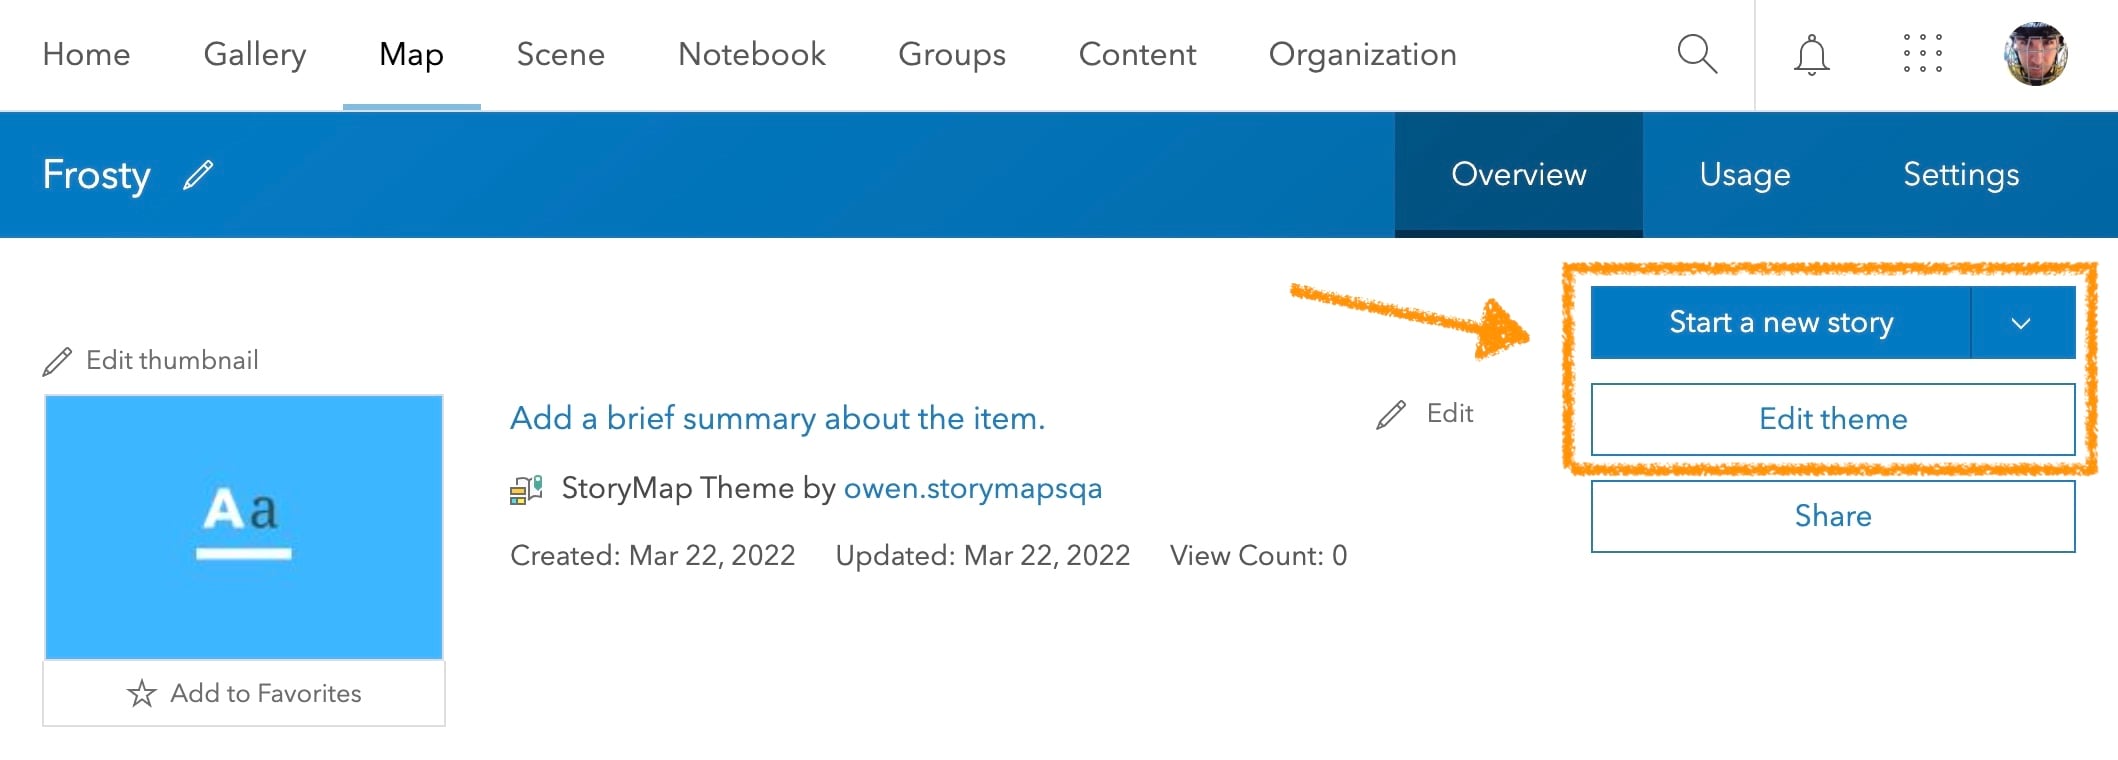 StoryMap Theme item page in ArcGIS